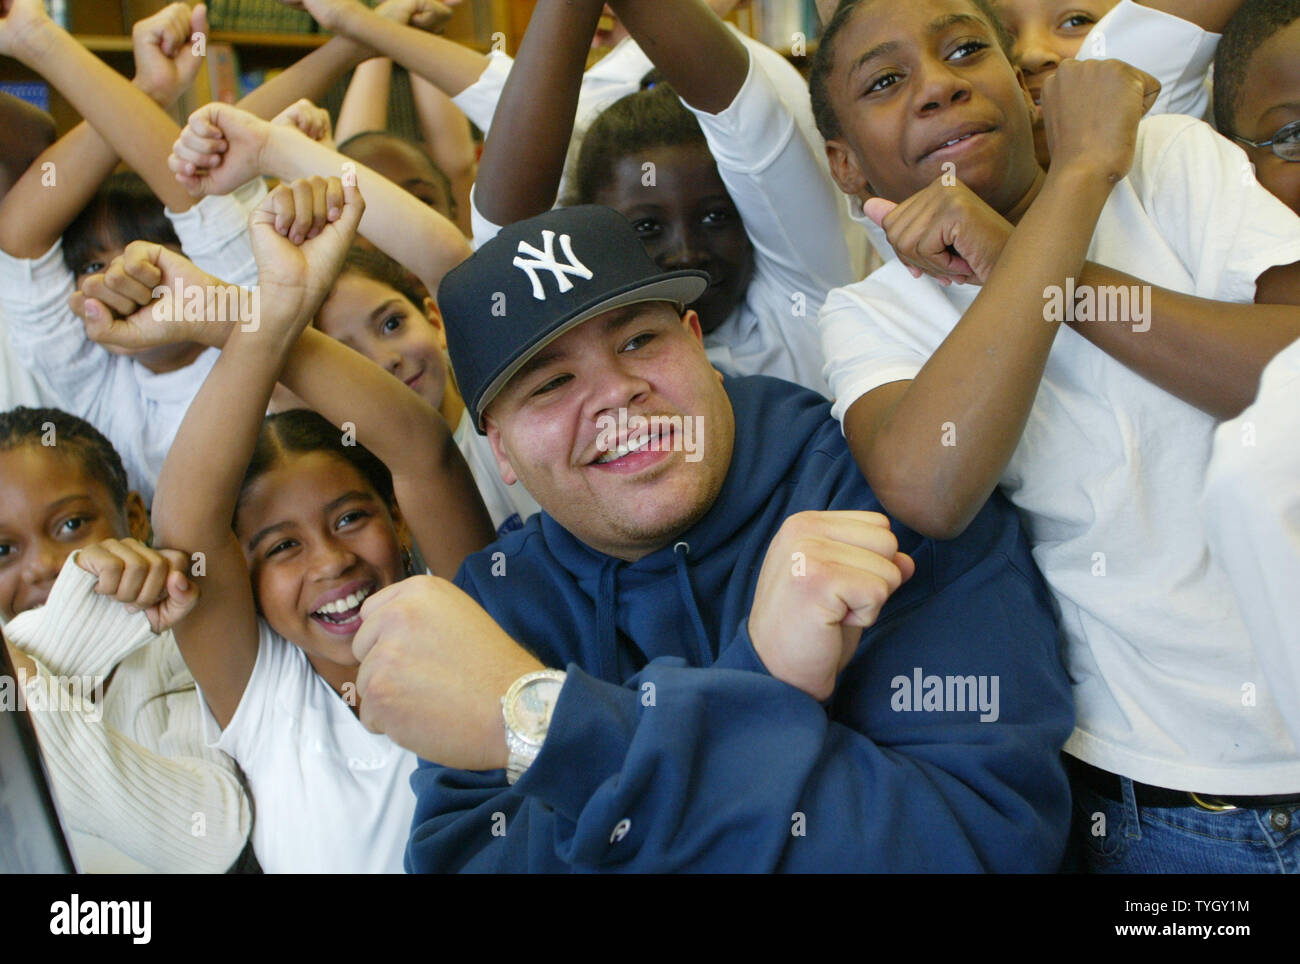 Joseph Cartegena, known as hip-hop artist Fat Joe, poses with students at PS 146 where he has donated 20 new computers to the Bronx school, which he attended as a child, on December 21, 2004 in New York City.  (UPI Photo/Monika Graff) Stock Photo